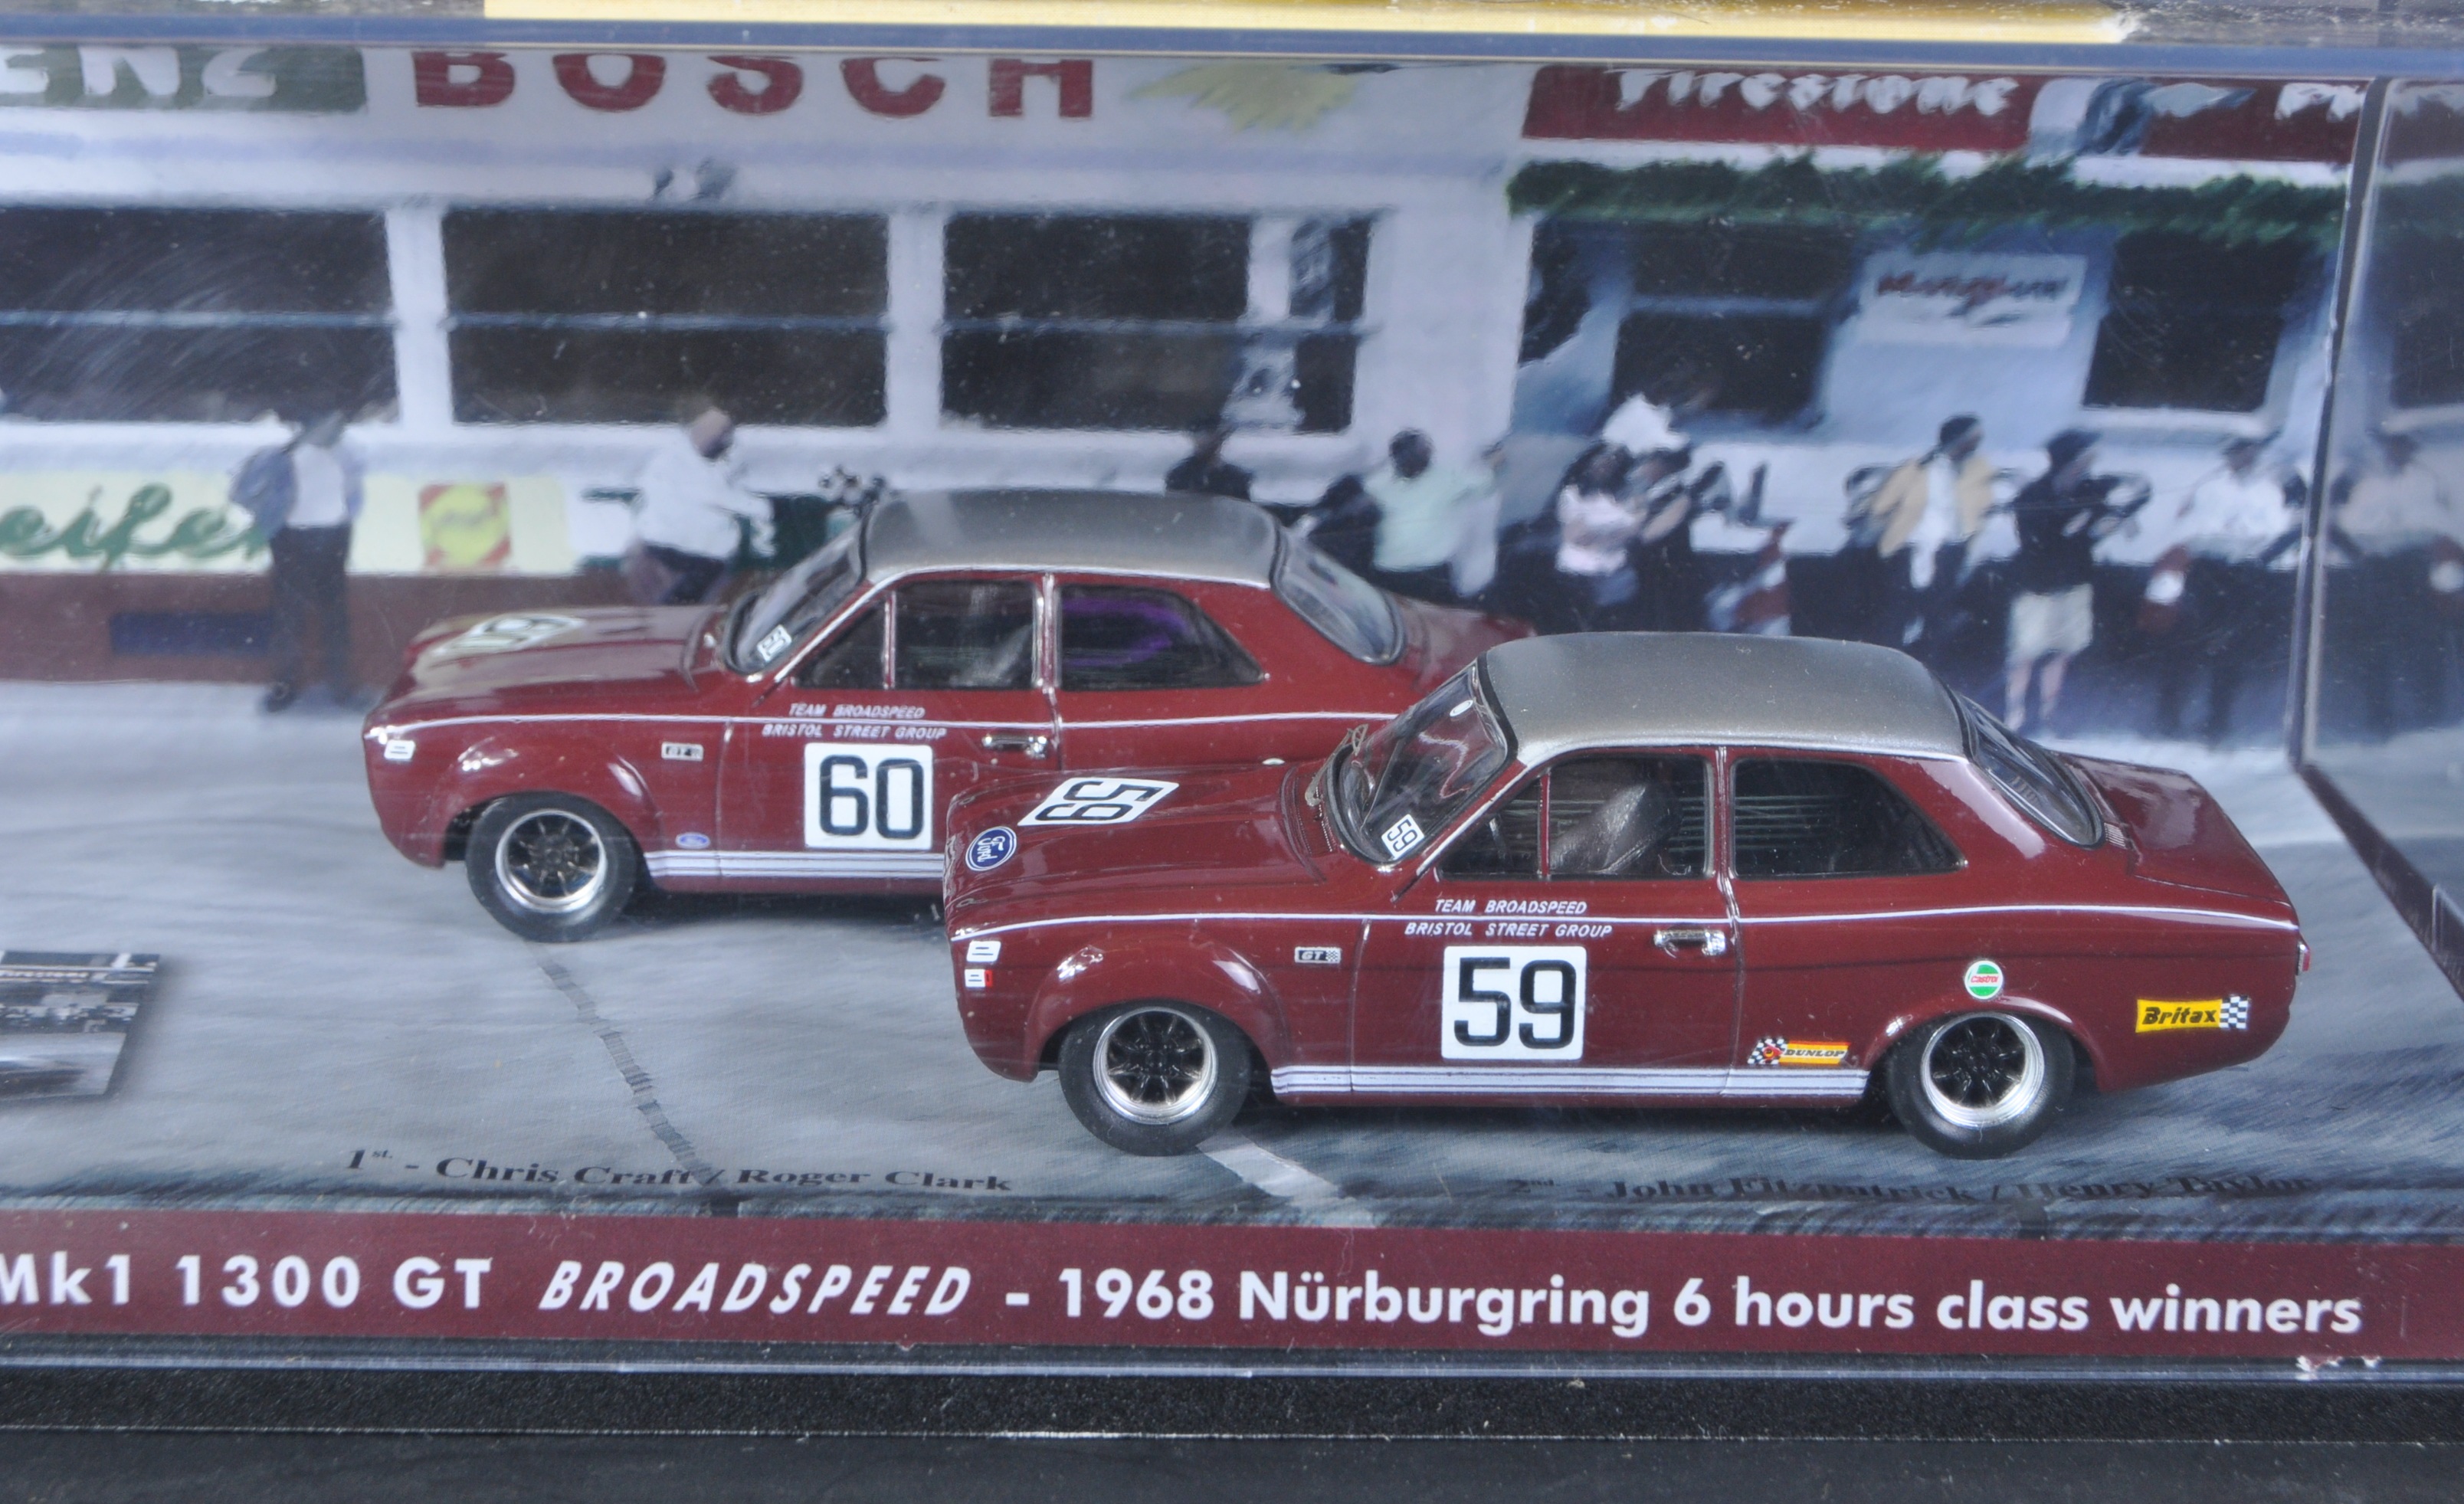 TWO 1/43 SCALE BROADSPEED INTEREST DIECAST MODEL CARS - Image 2 of 5